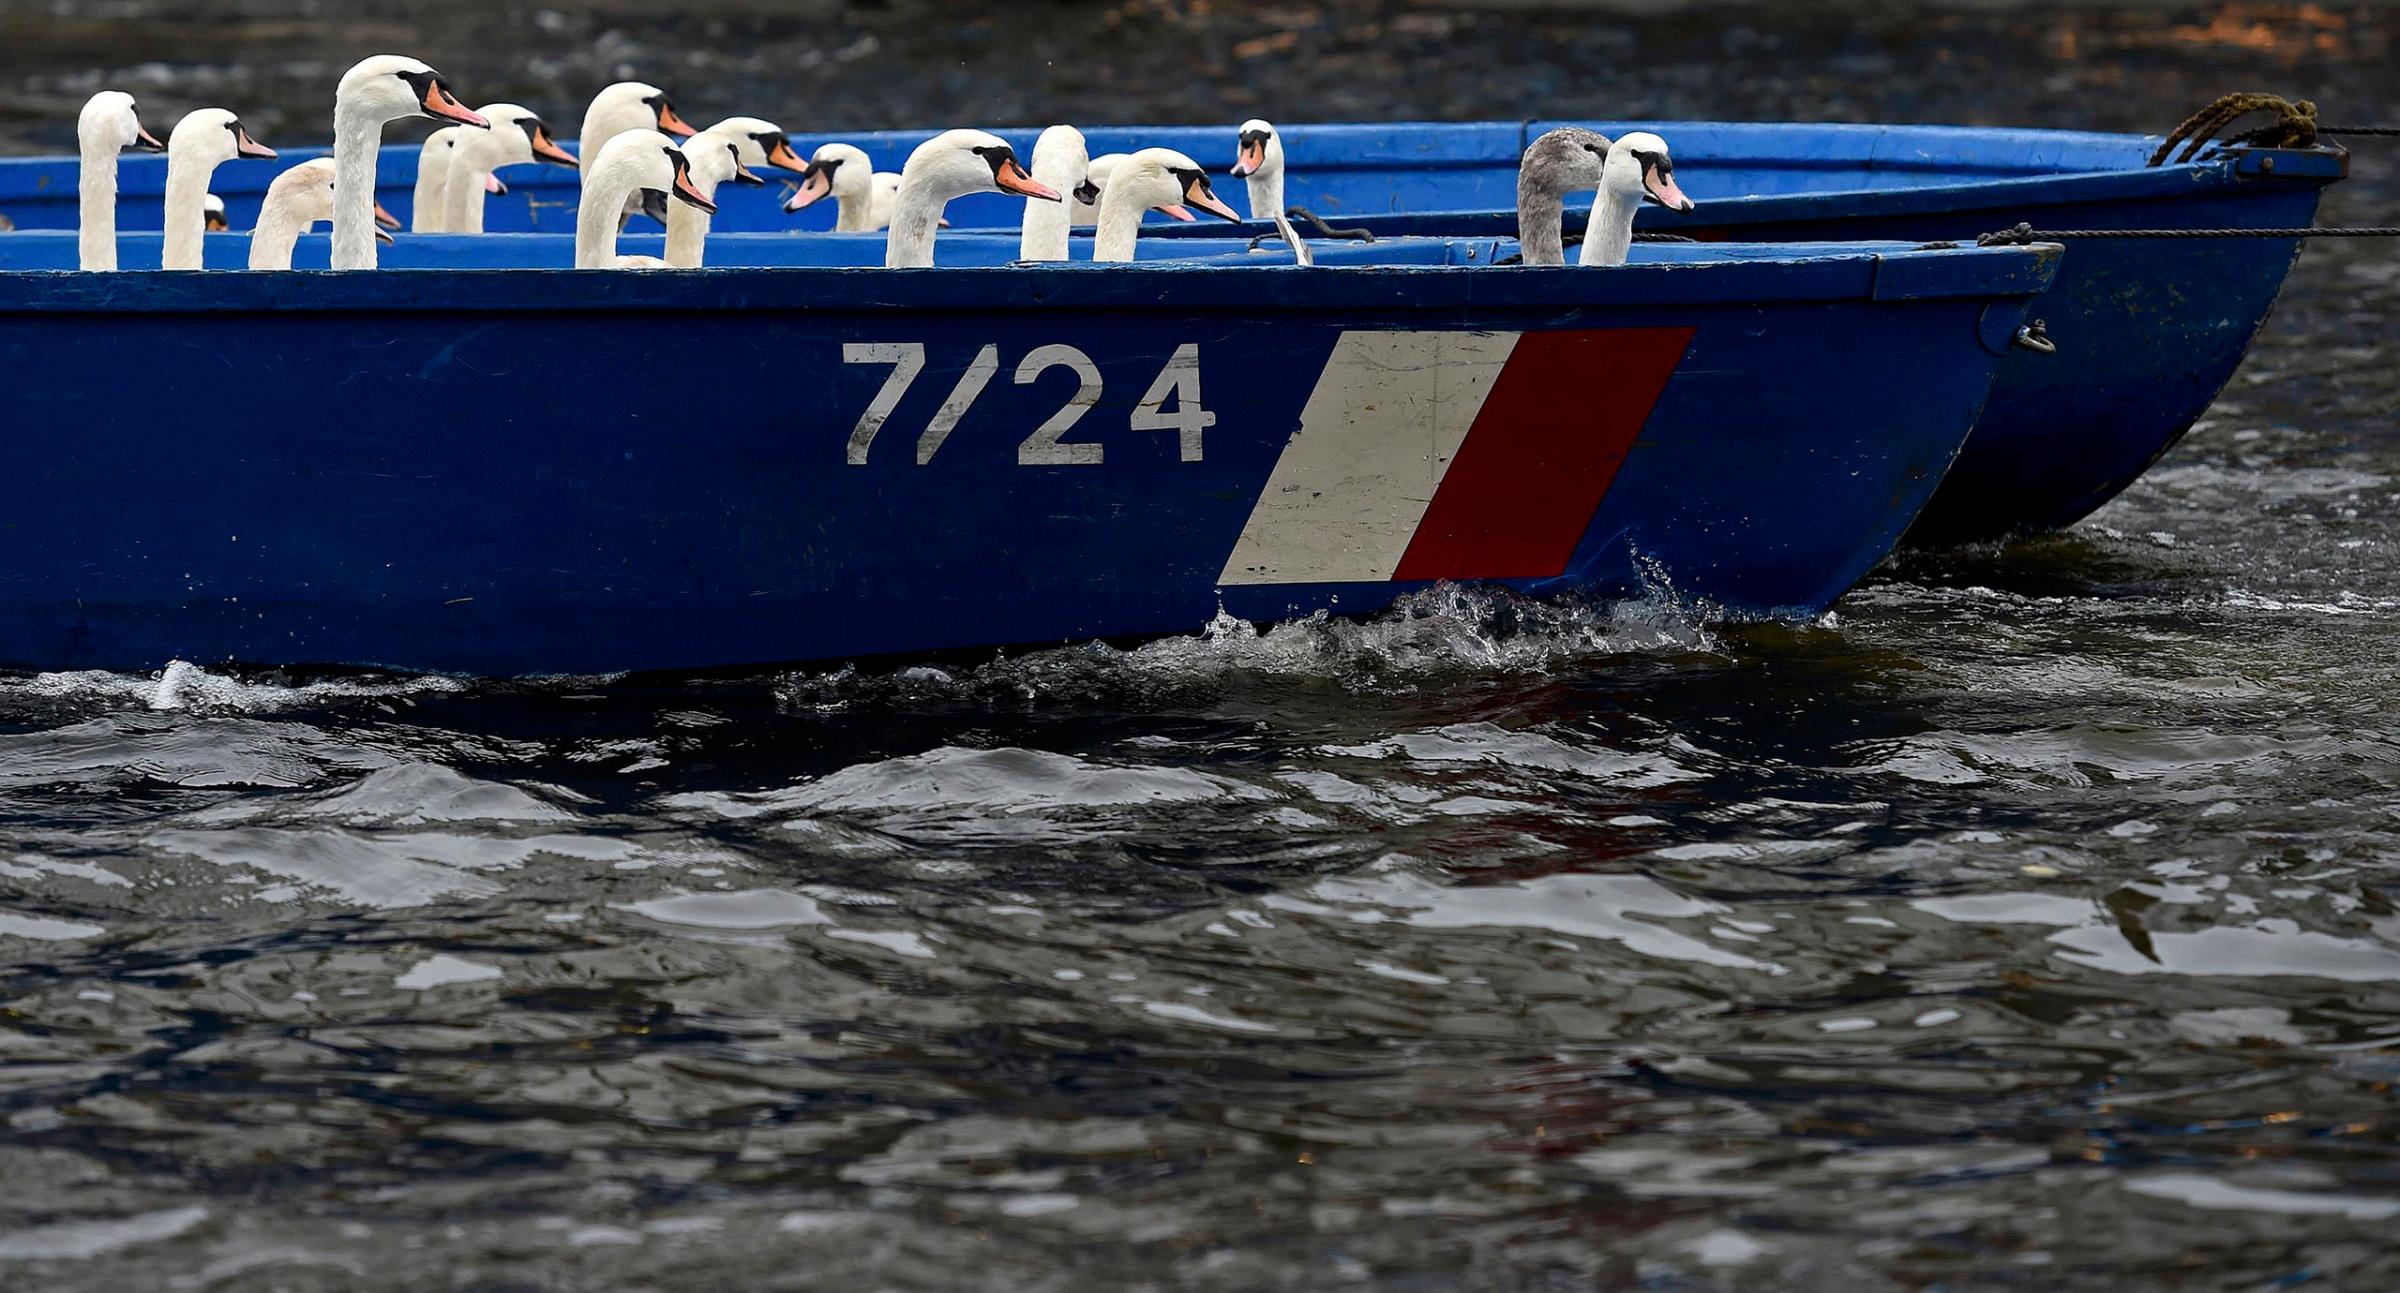 Swans sit in a boat after they were rounded up from Hamburg's inner city lake Alster on Nov. 18, 2014.